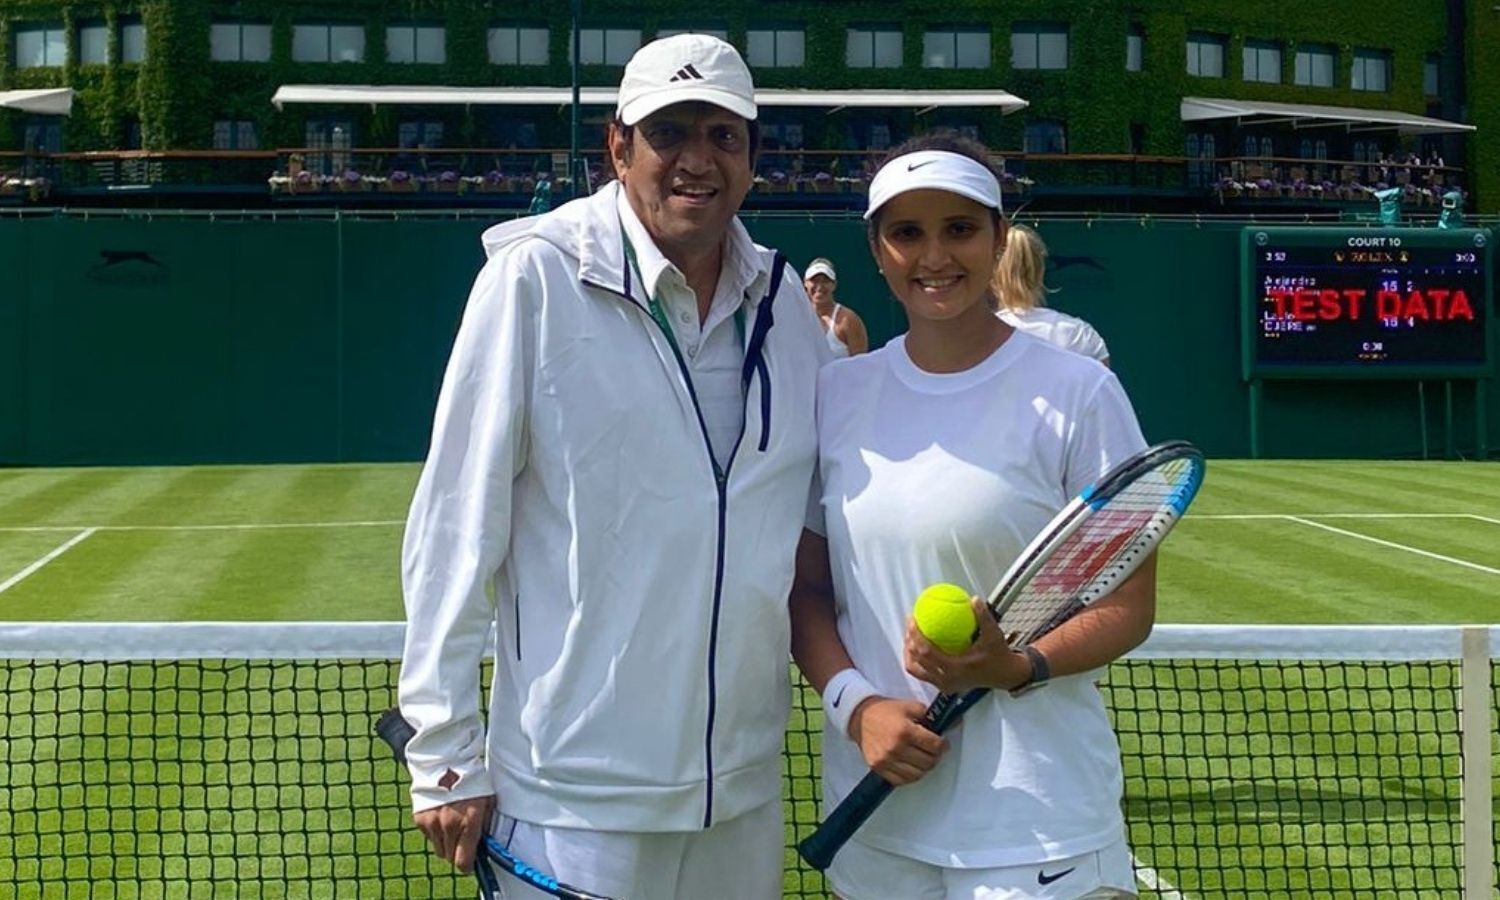 Sania Mirza's dad writes: Will miss her grit and supreme confidence to win  against all odds